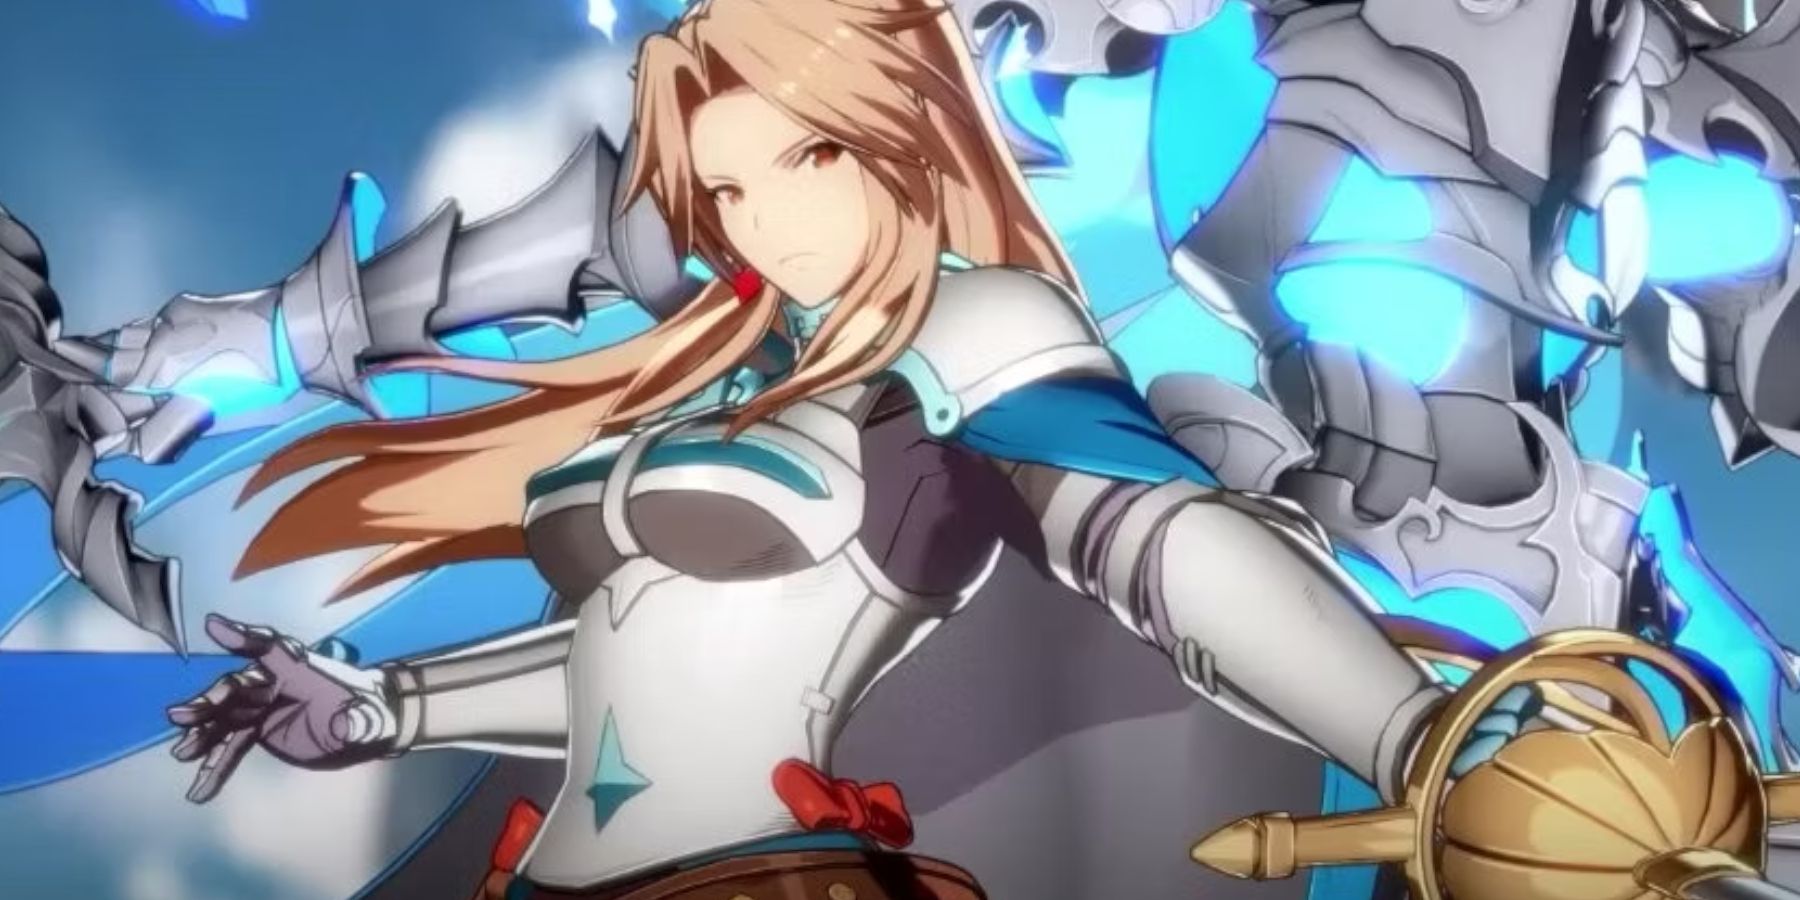 Katalina with Ares behind her